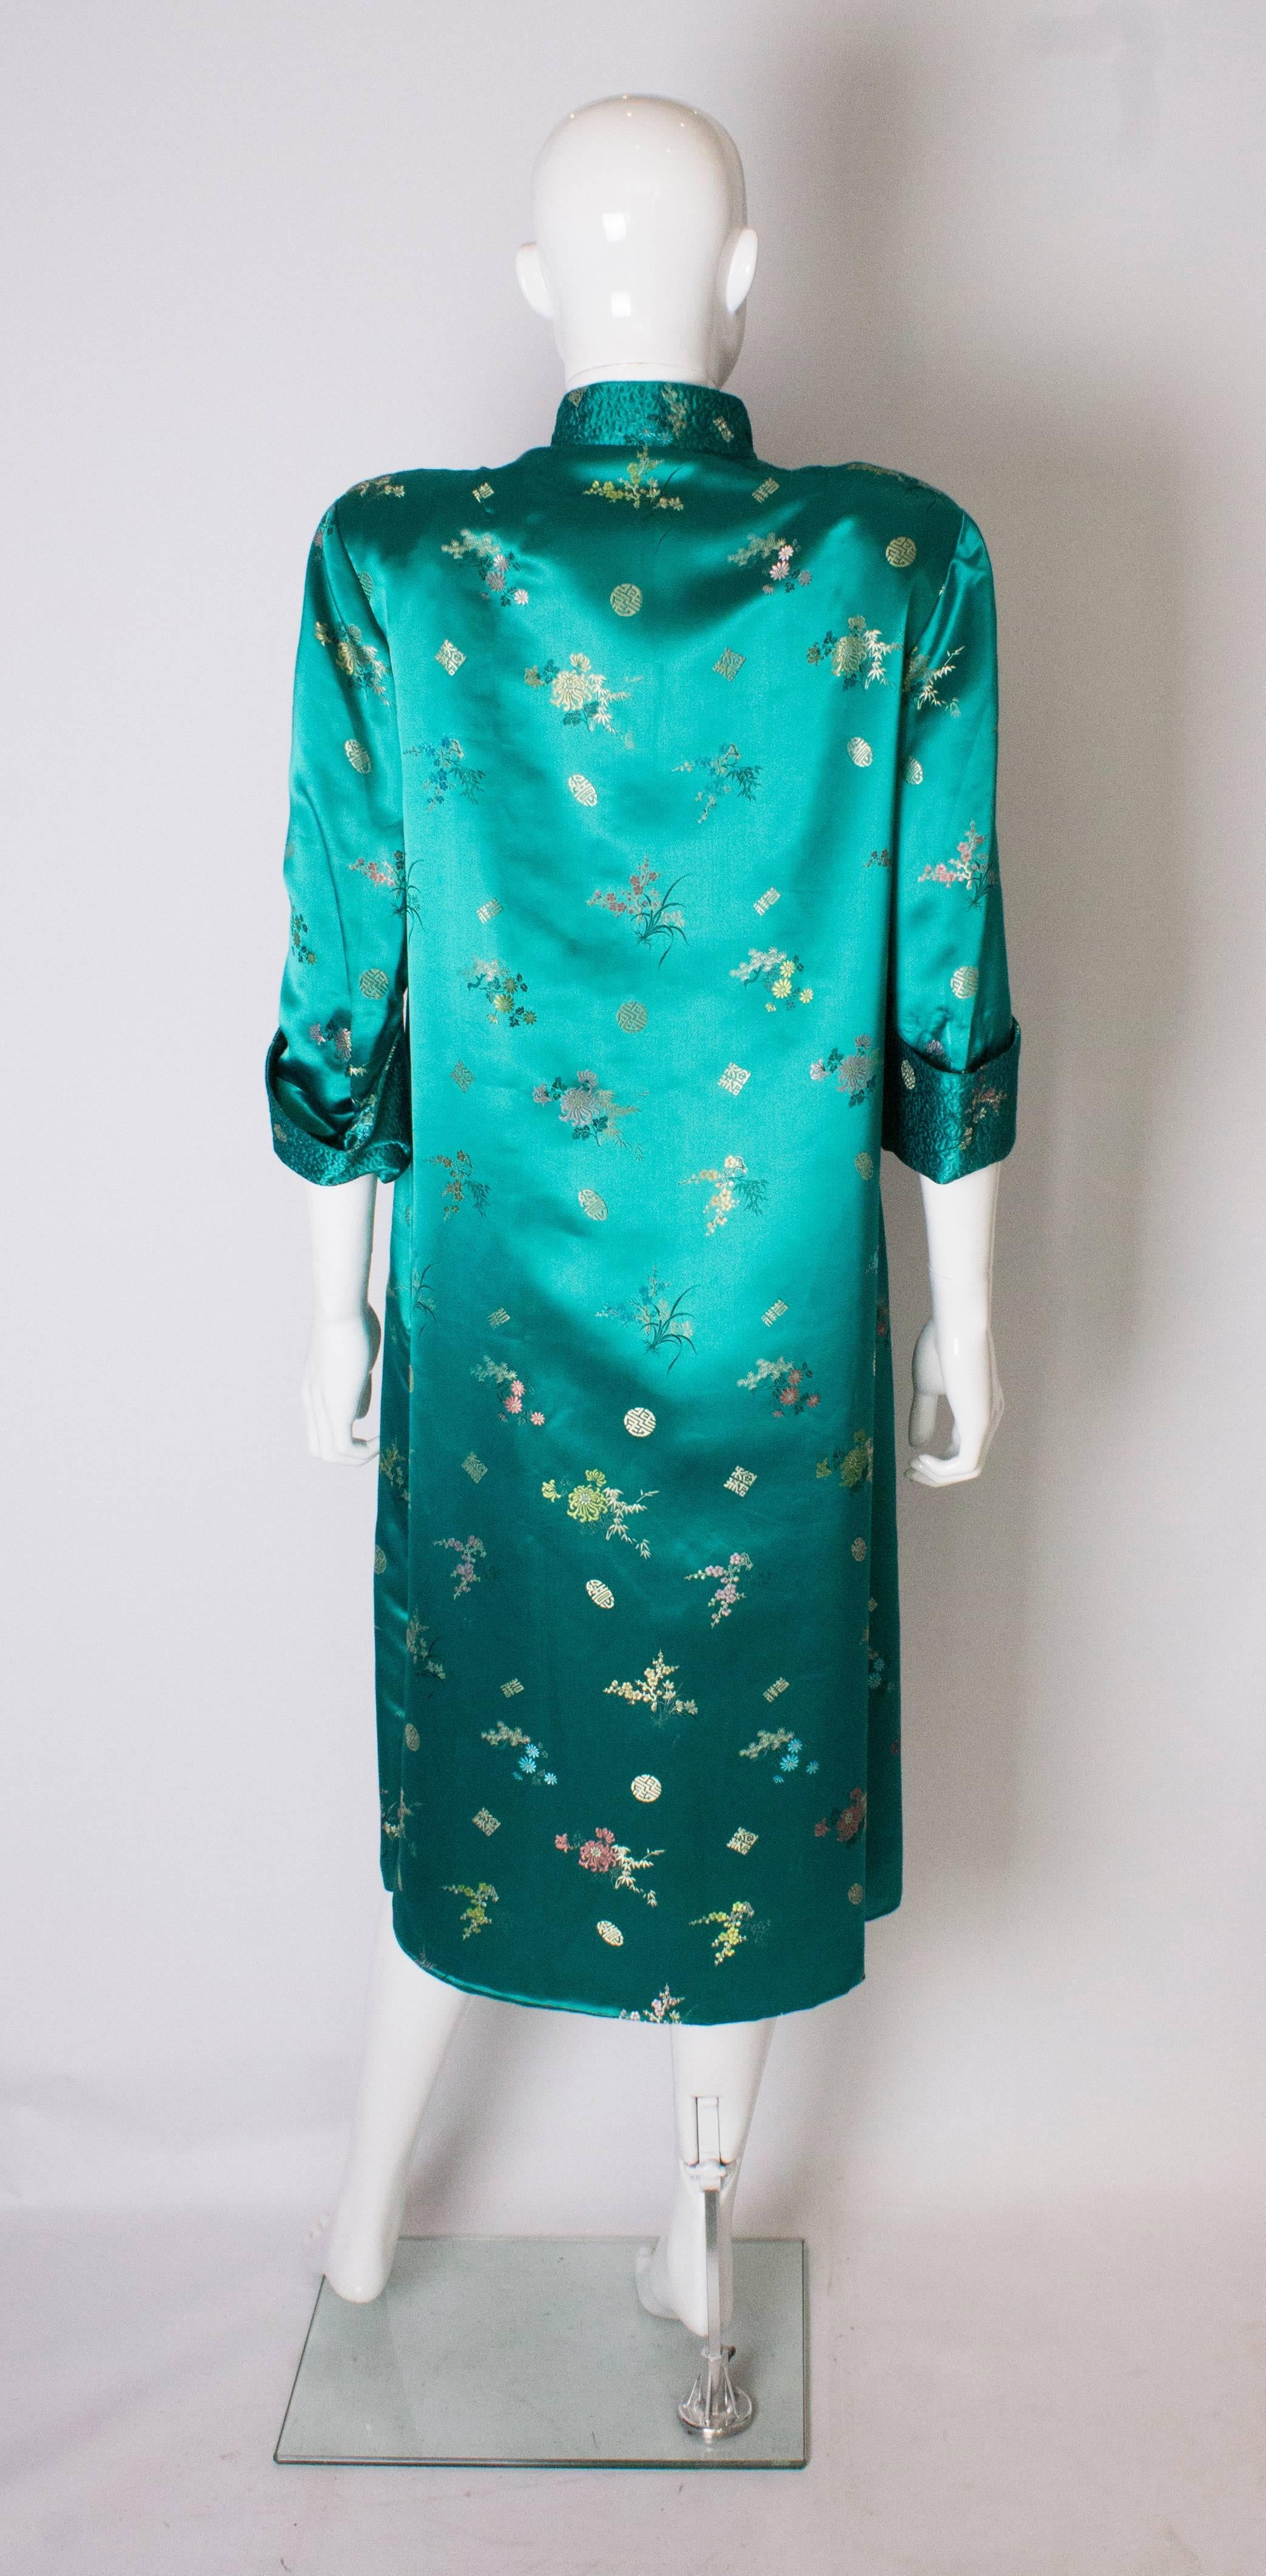 A Vintage 1970s Turquoise Chinese Coat with Stand-up Collar & Decorative Pockets 2